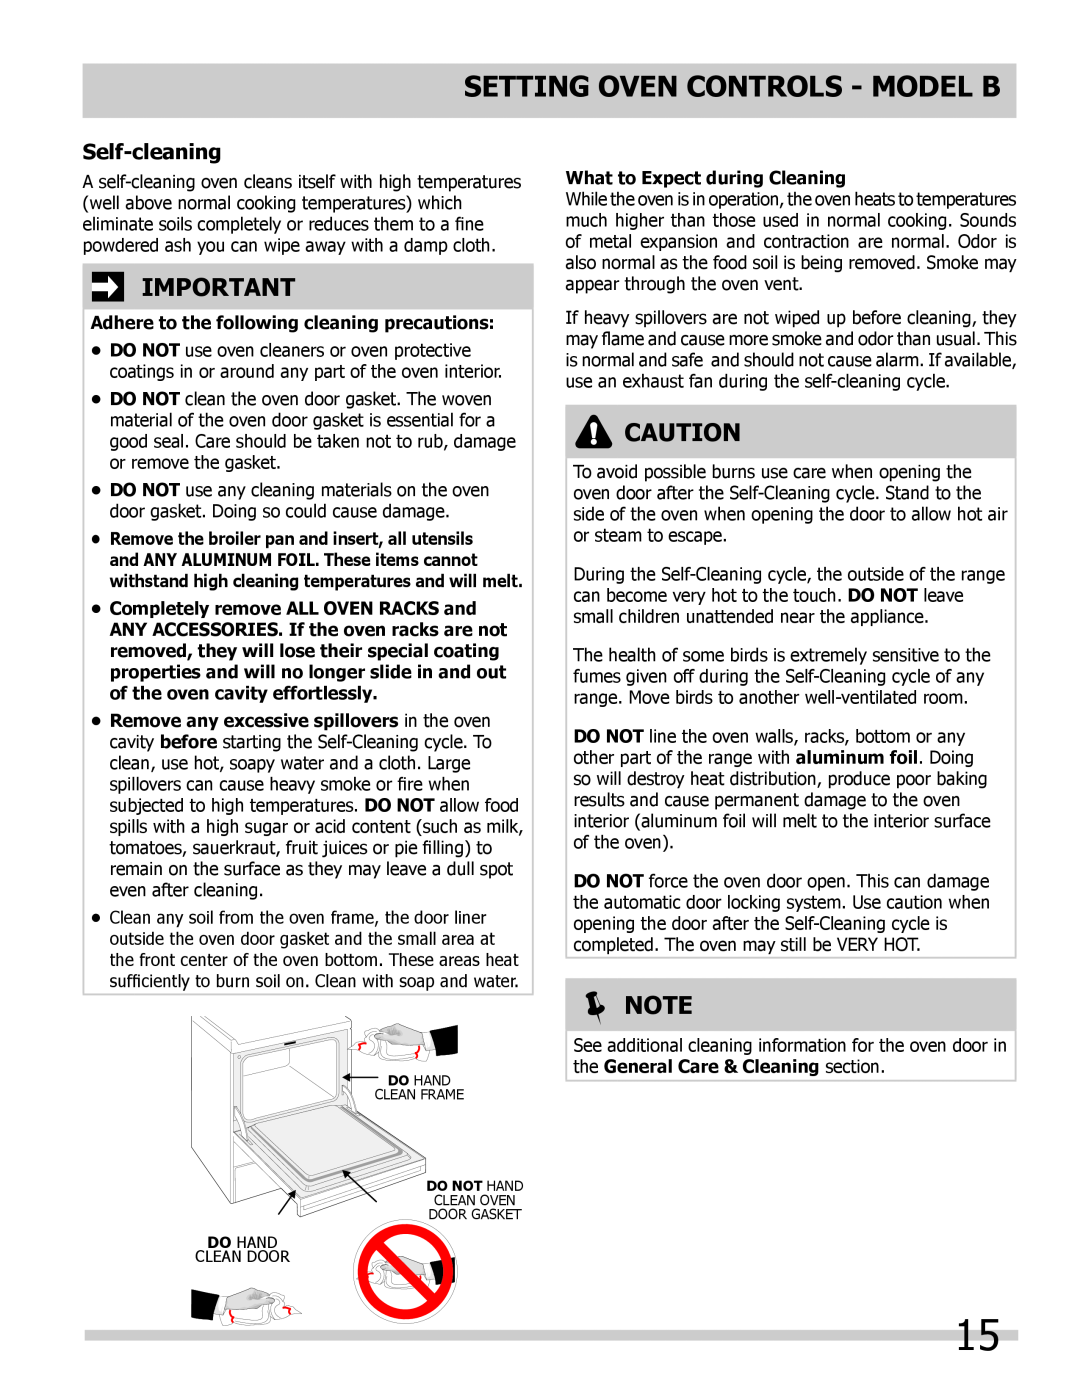 Frigidaire 318200964 Self-cleaning, Adhere to the following cleaning precautions, What to Expect during Cleaning,  Note 